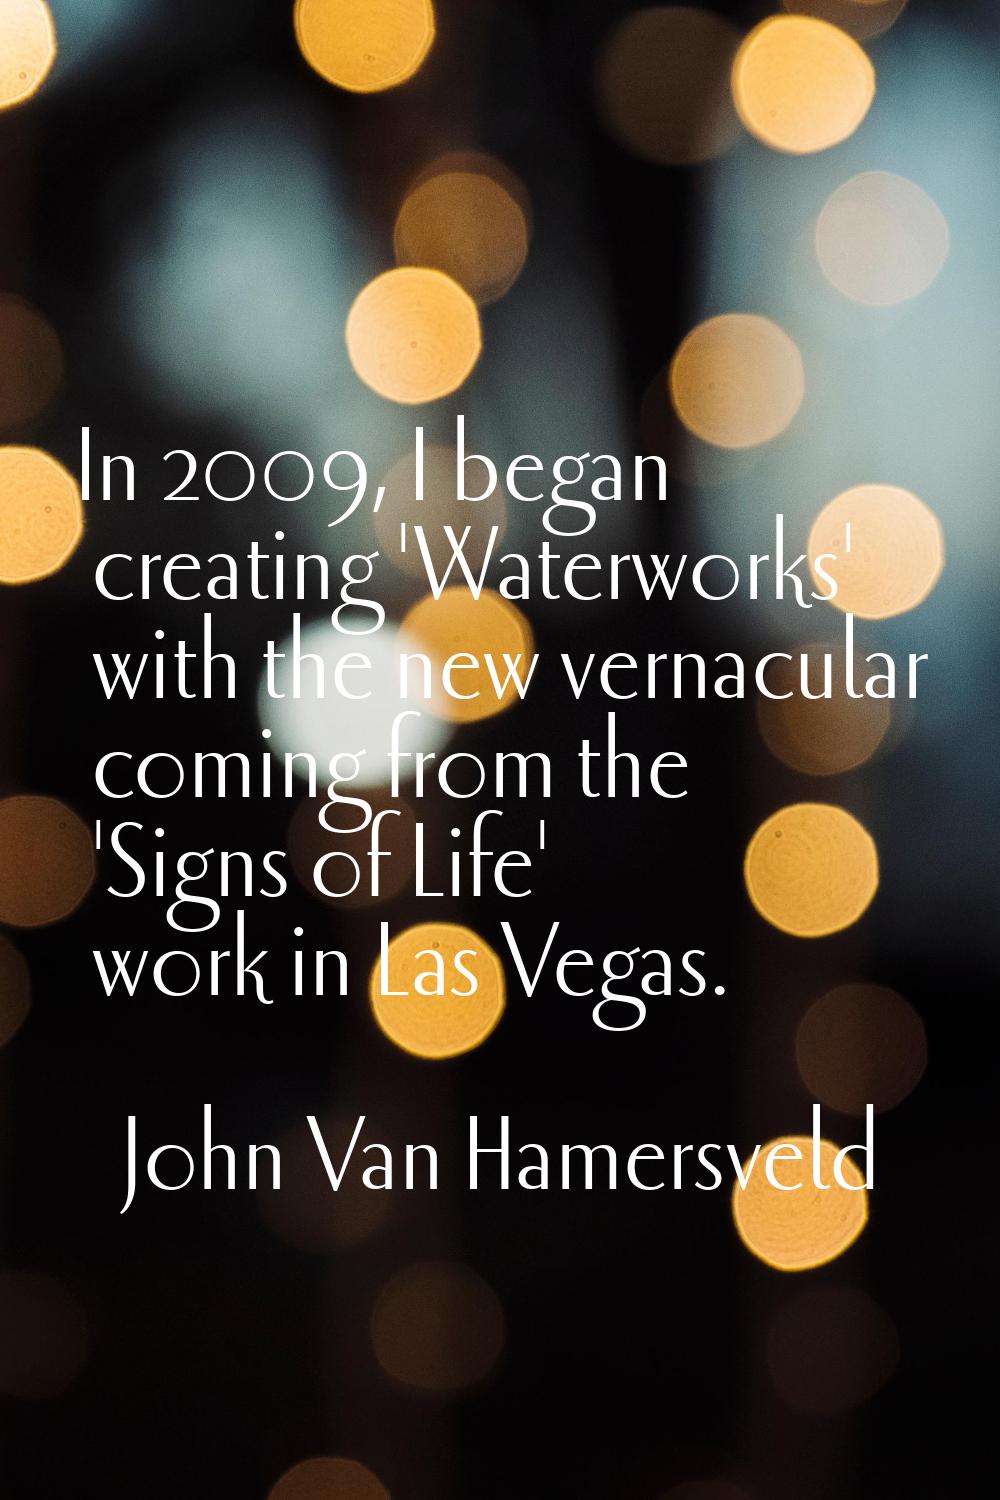 In 2009, I began creating 'Waterworks' with the new vernacular coming from the 'Signs of Life' work